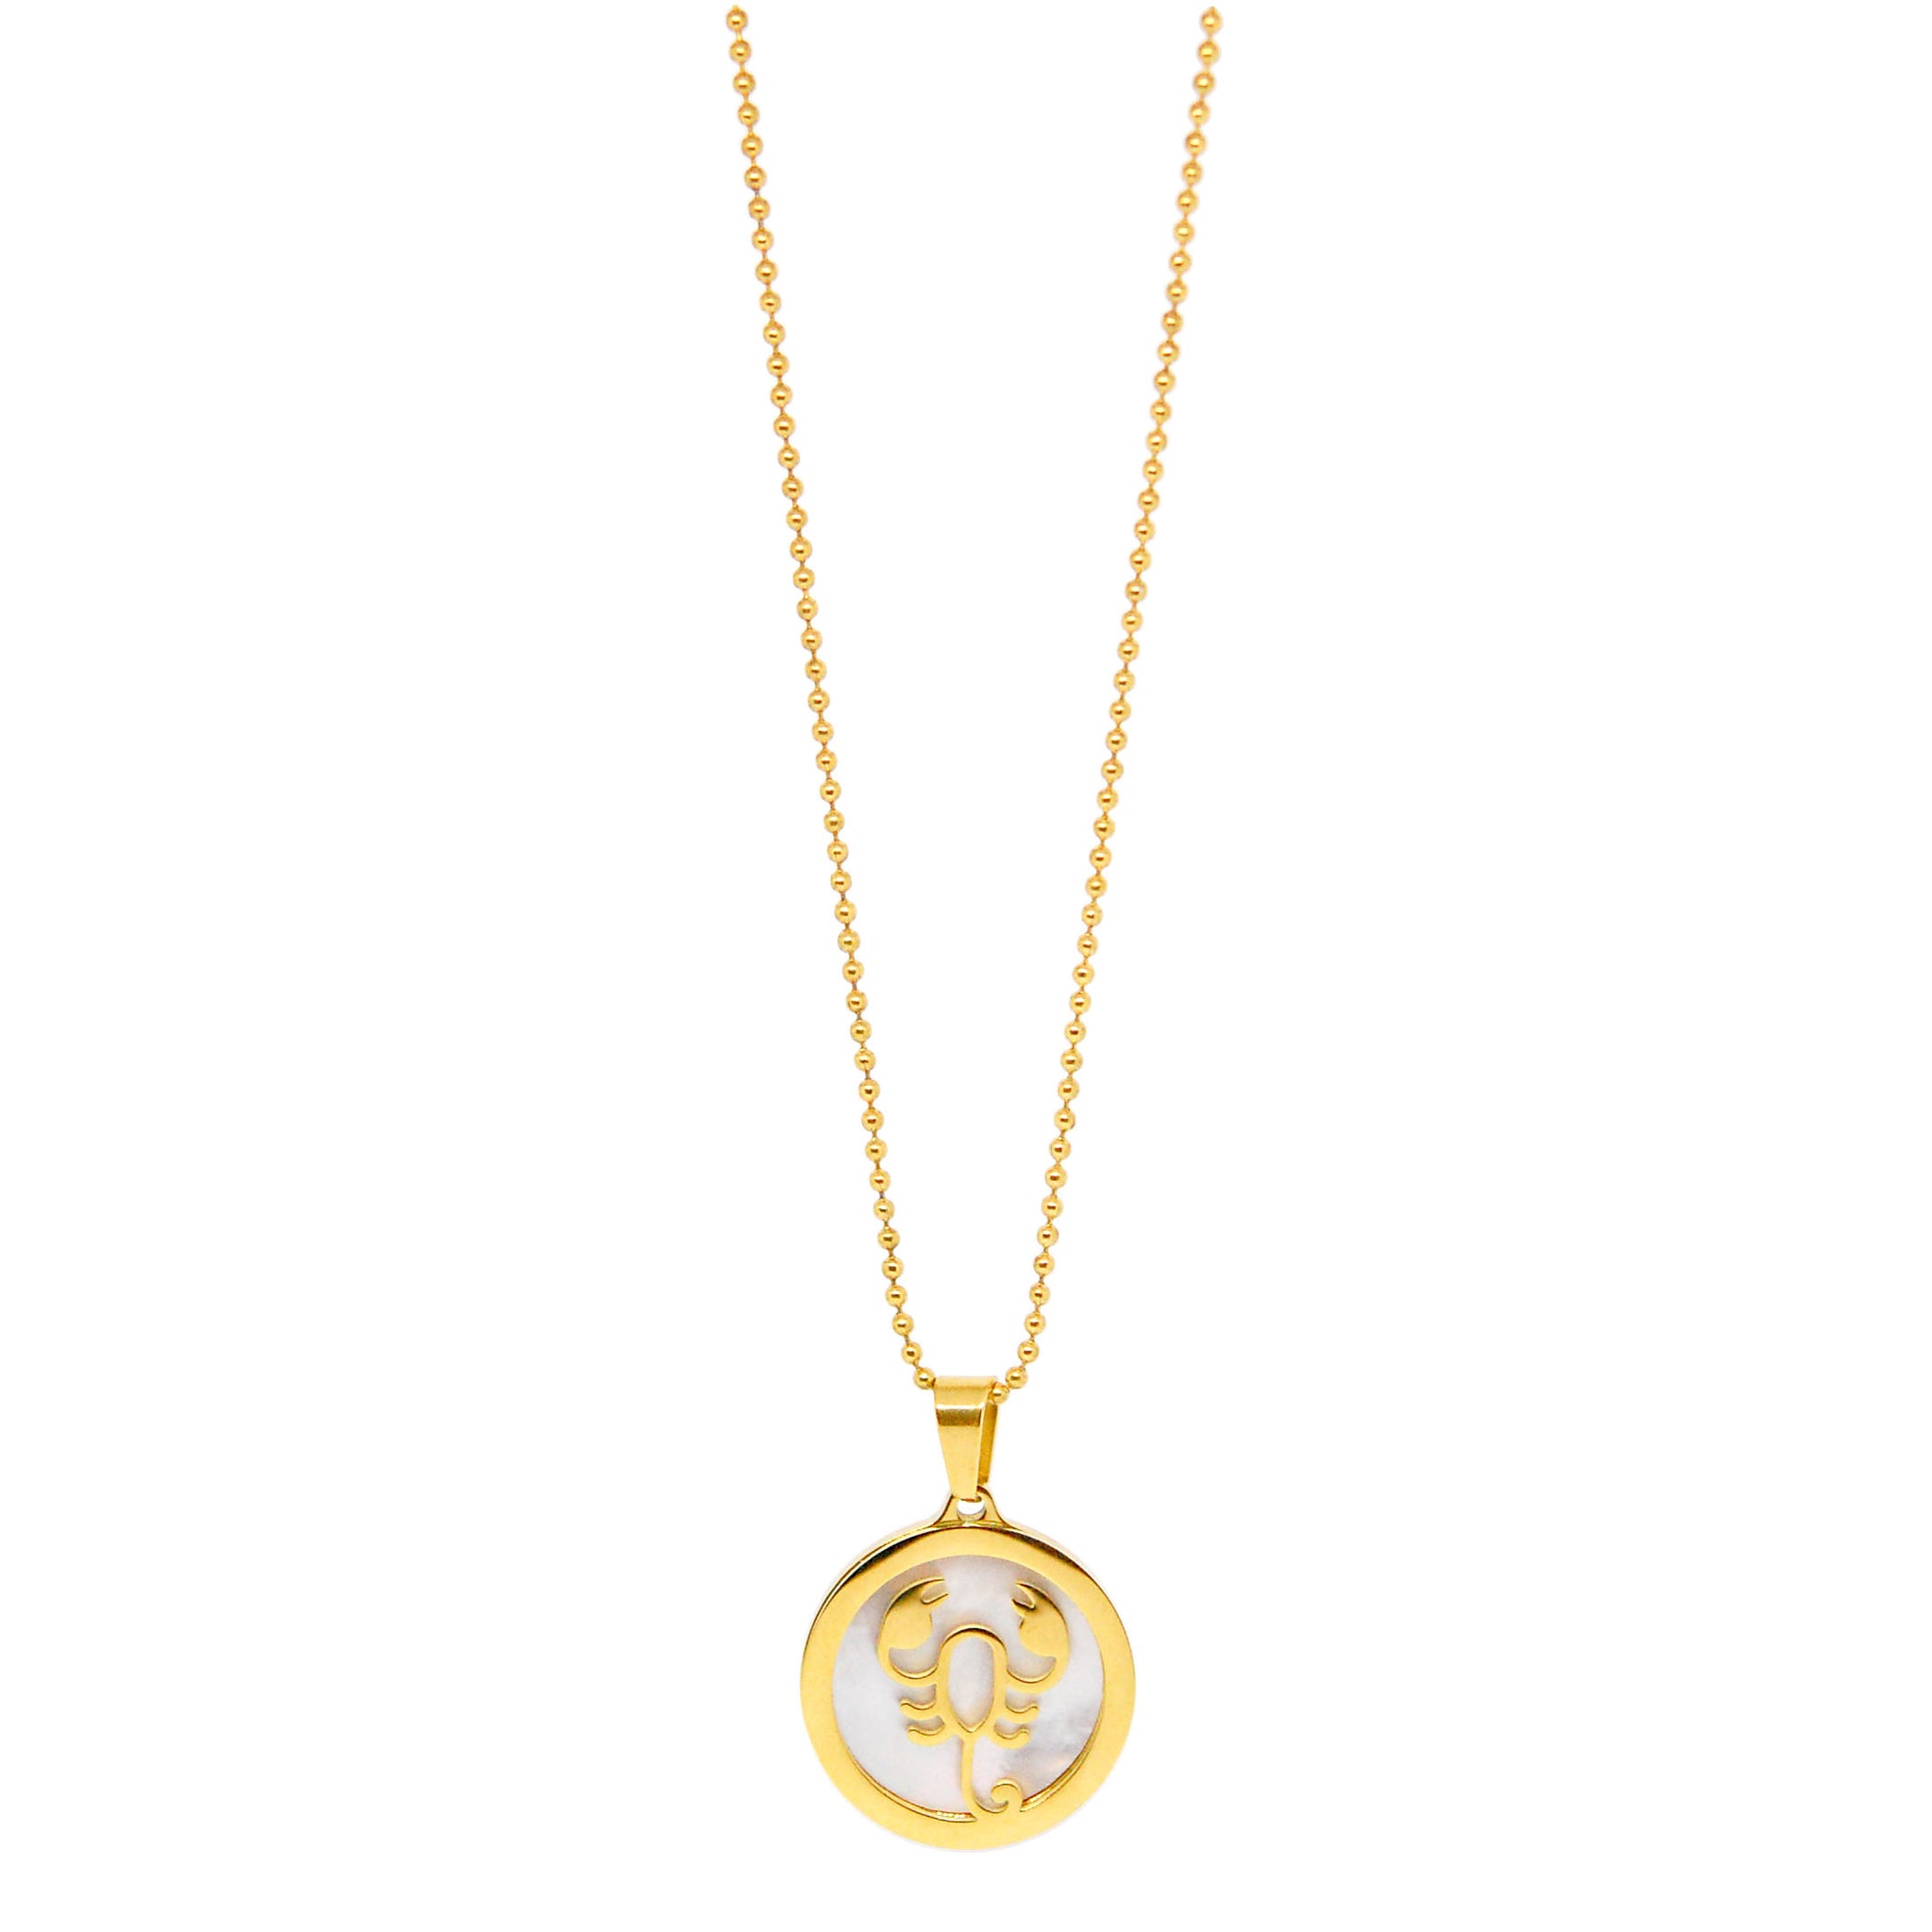 ESN 7967: All IPG Mop Scorpion Zodiac Necklace w/ 18" IPG Ball Chain